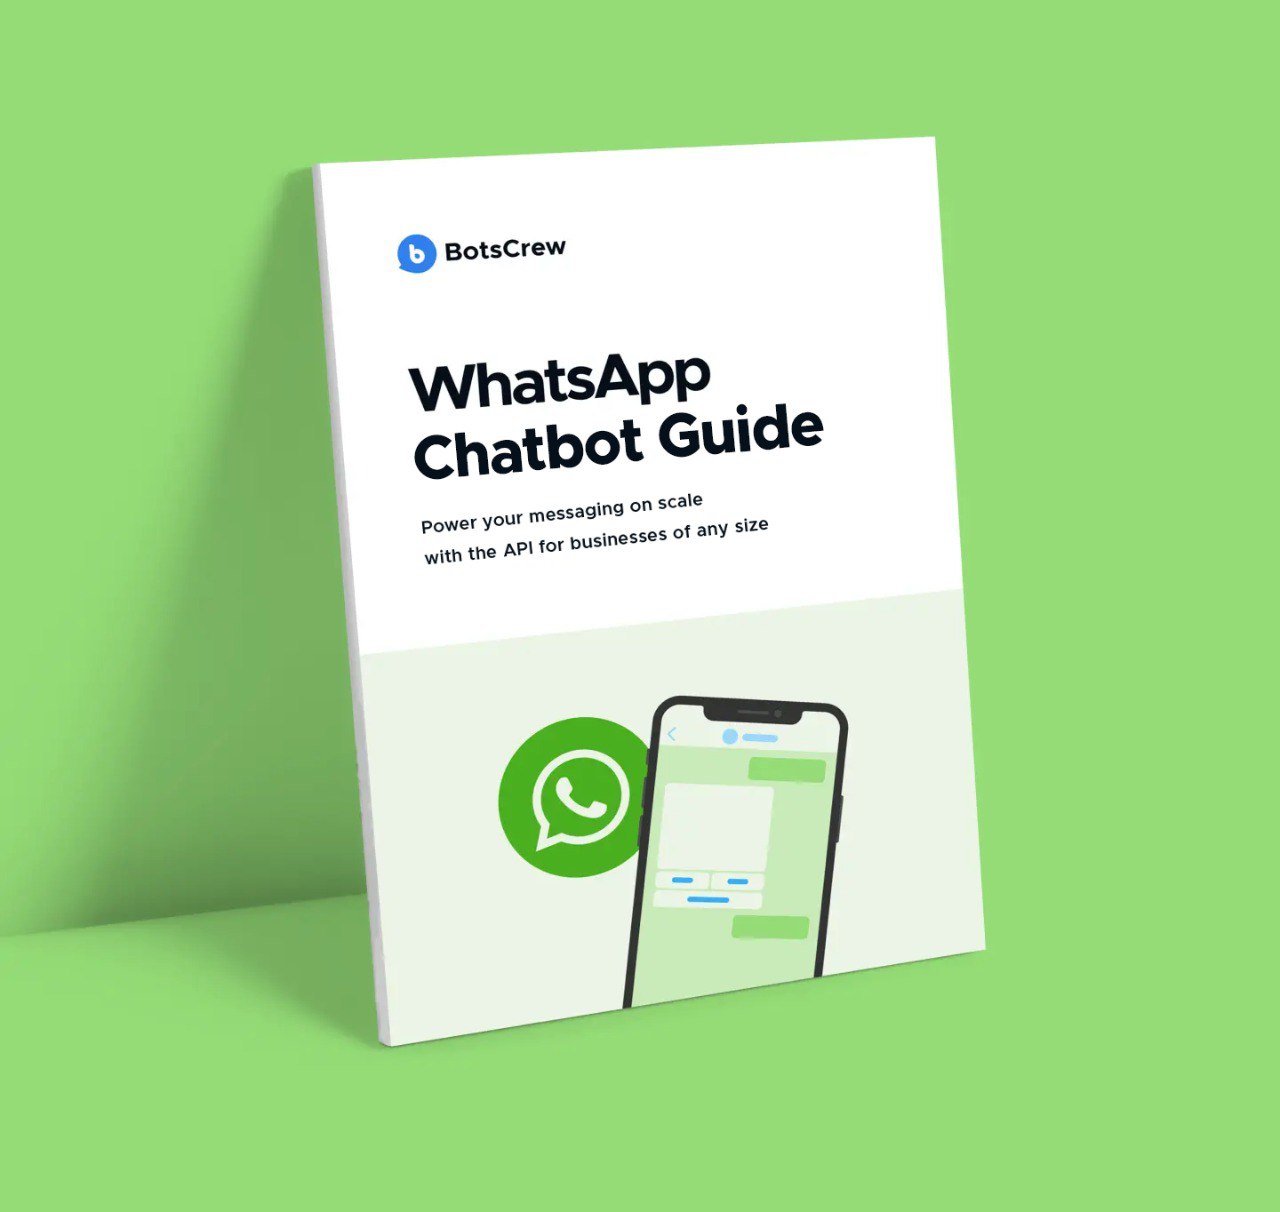 image book about whatsapp guide